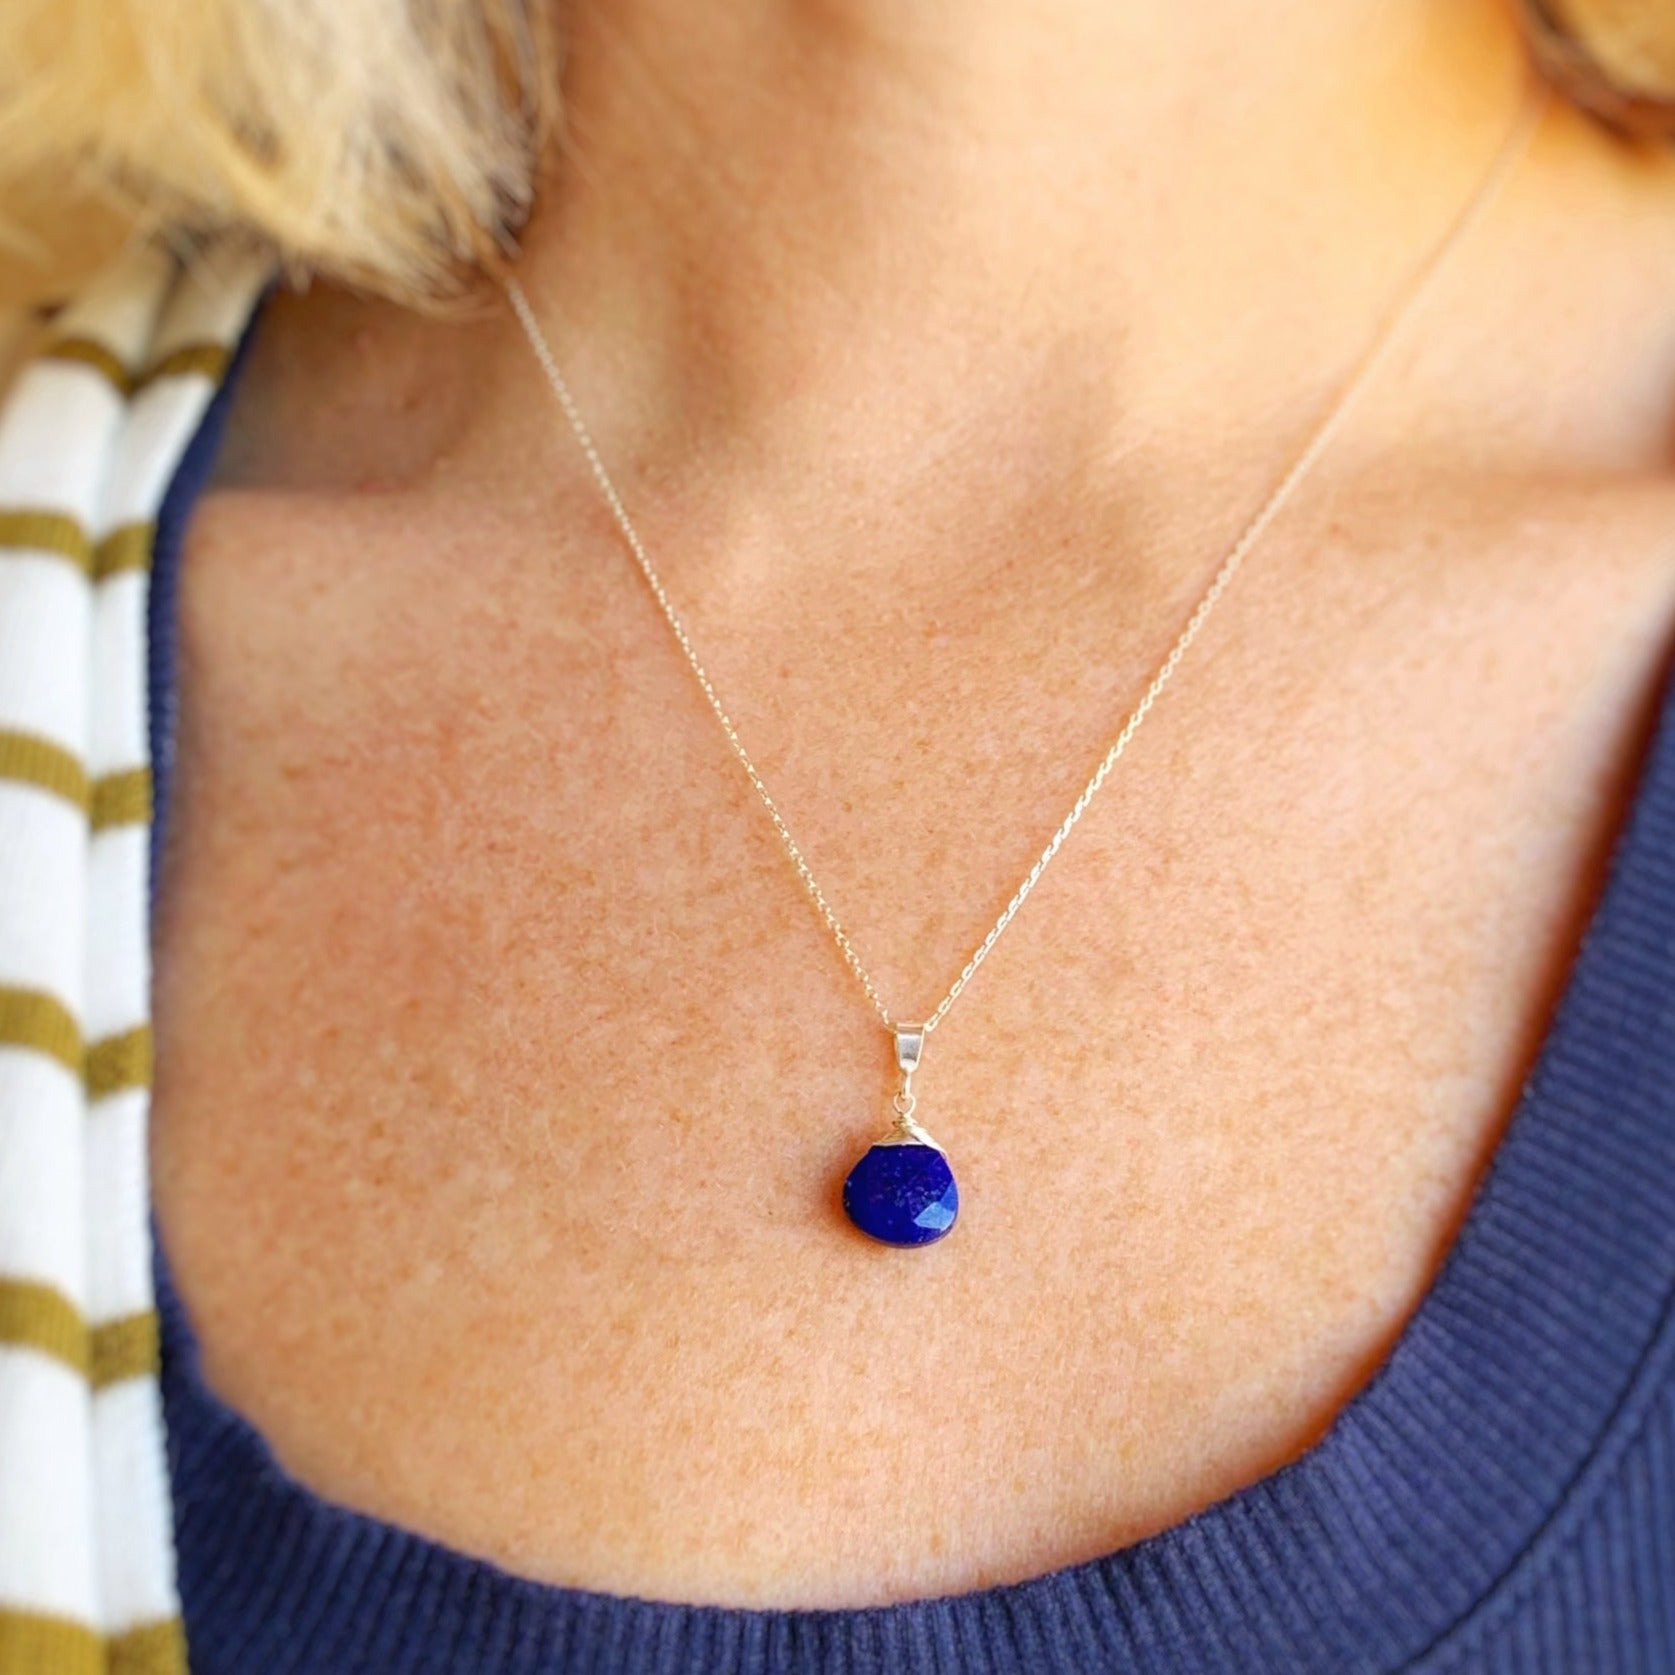 the neptune pendant necklace by mermaids and madeleines features a sterling silver wire wrapped royal blue lapis briolette as a pendant with sterling silver findings and chain. this necklace is photographed worn on a person with a close up view with a little bit of sweater in view